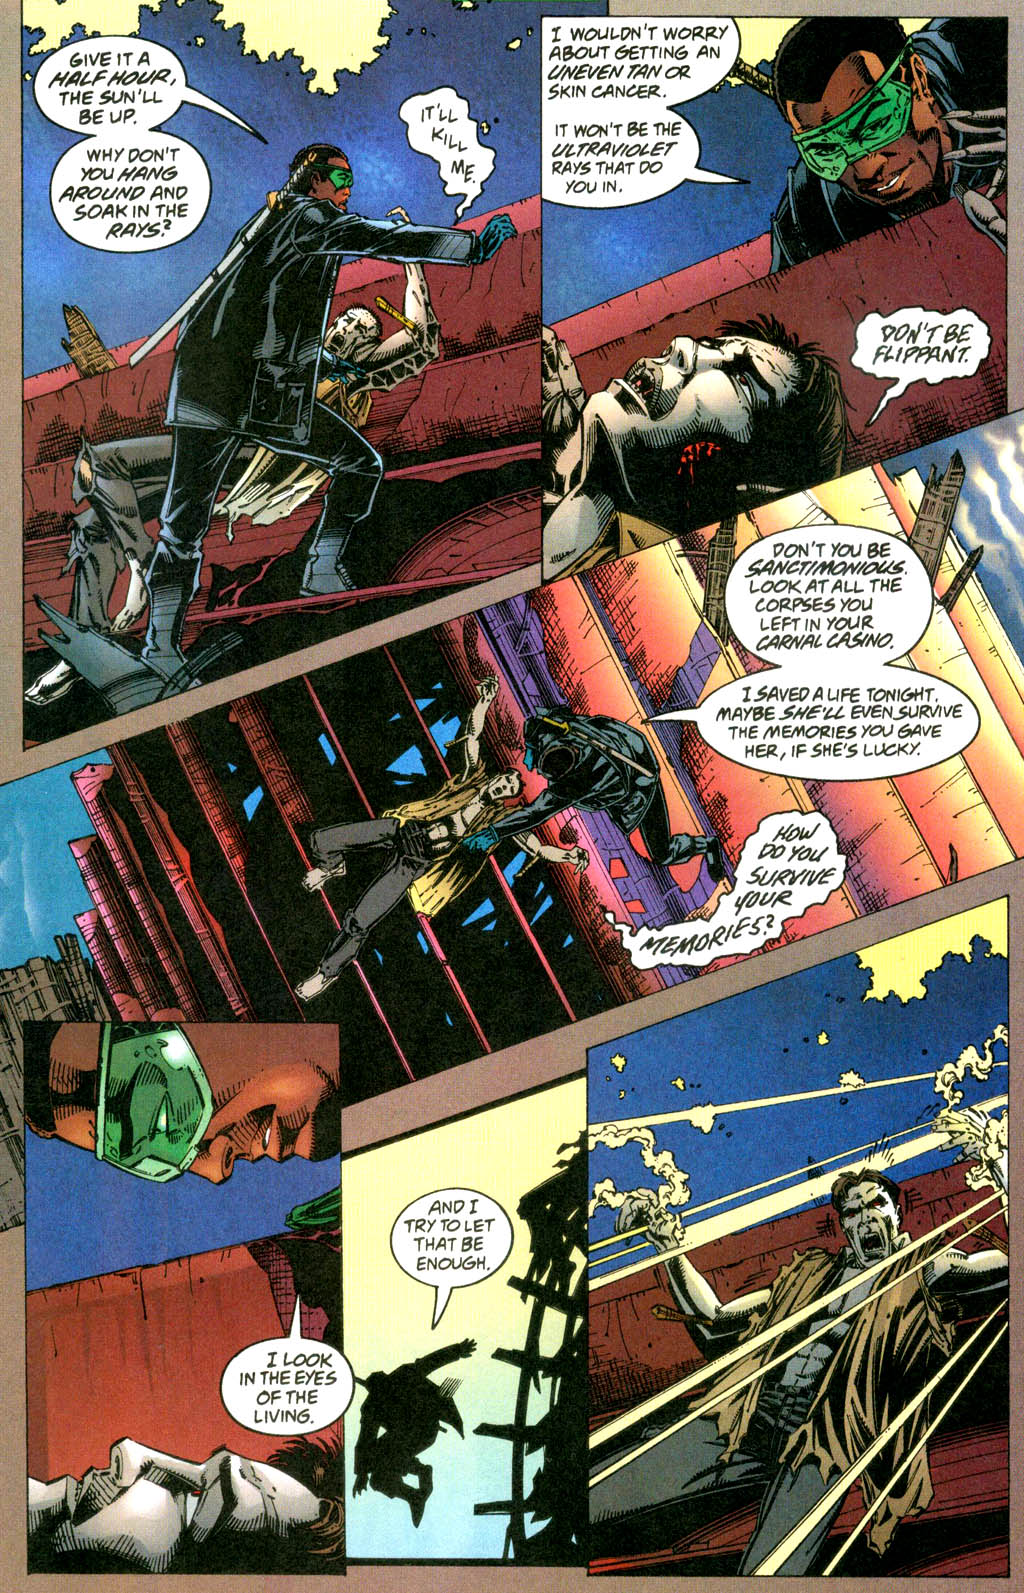 Blade (1998) 1 Page 16